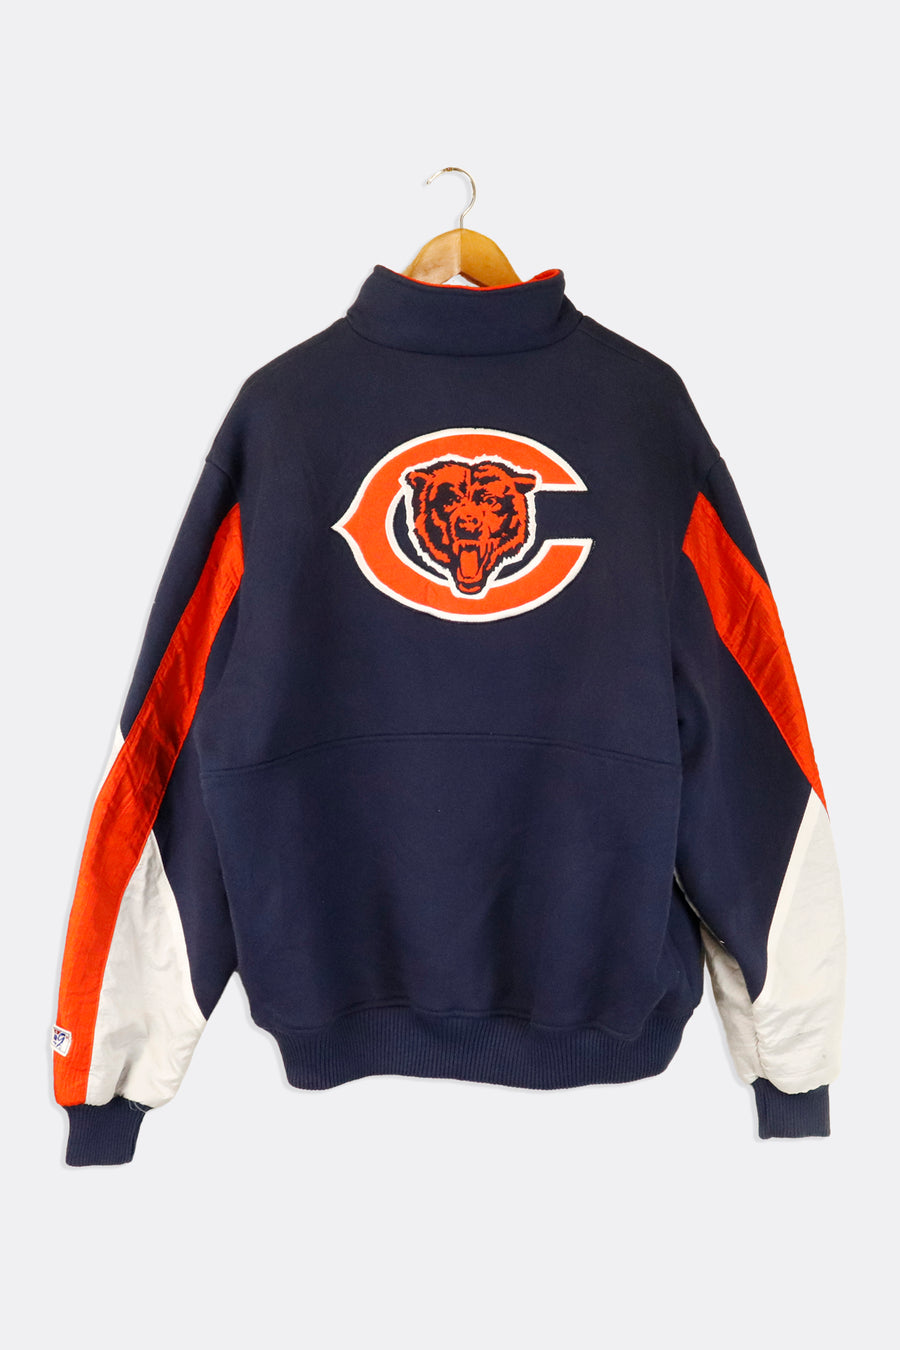 Vintage NFL Chicago Bears Fleece Half Zip With Nylon Sleeves Large Pockets Embroidered Logo On Back Outerwear Sz XL